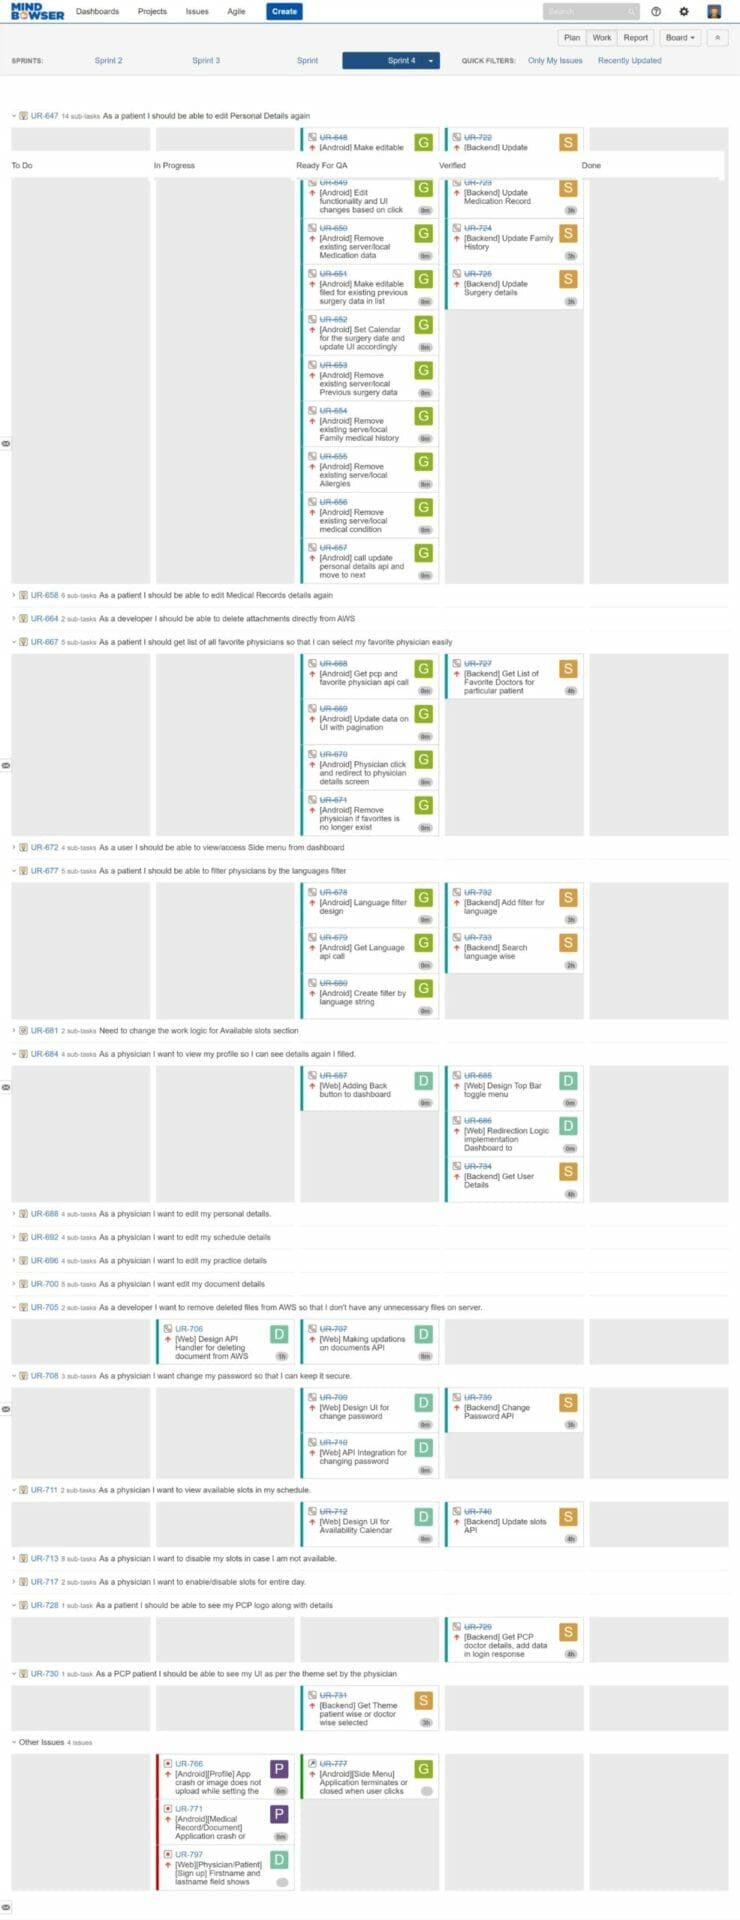 Fig: Screenshots of project from Jira- The project management tool showing the different user stories and their status